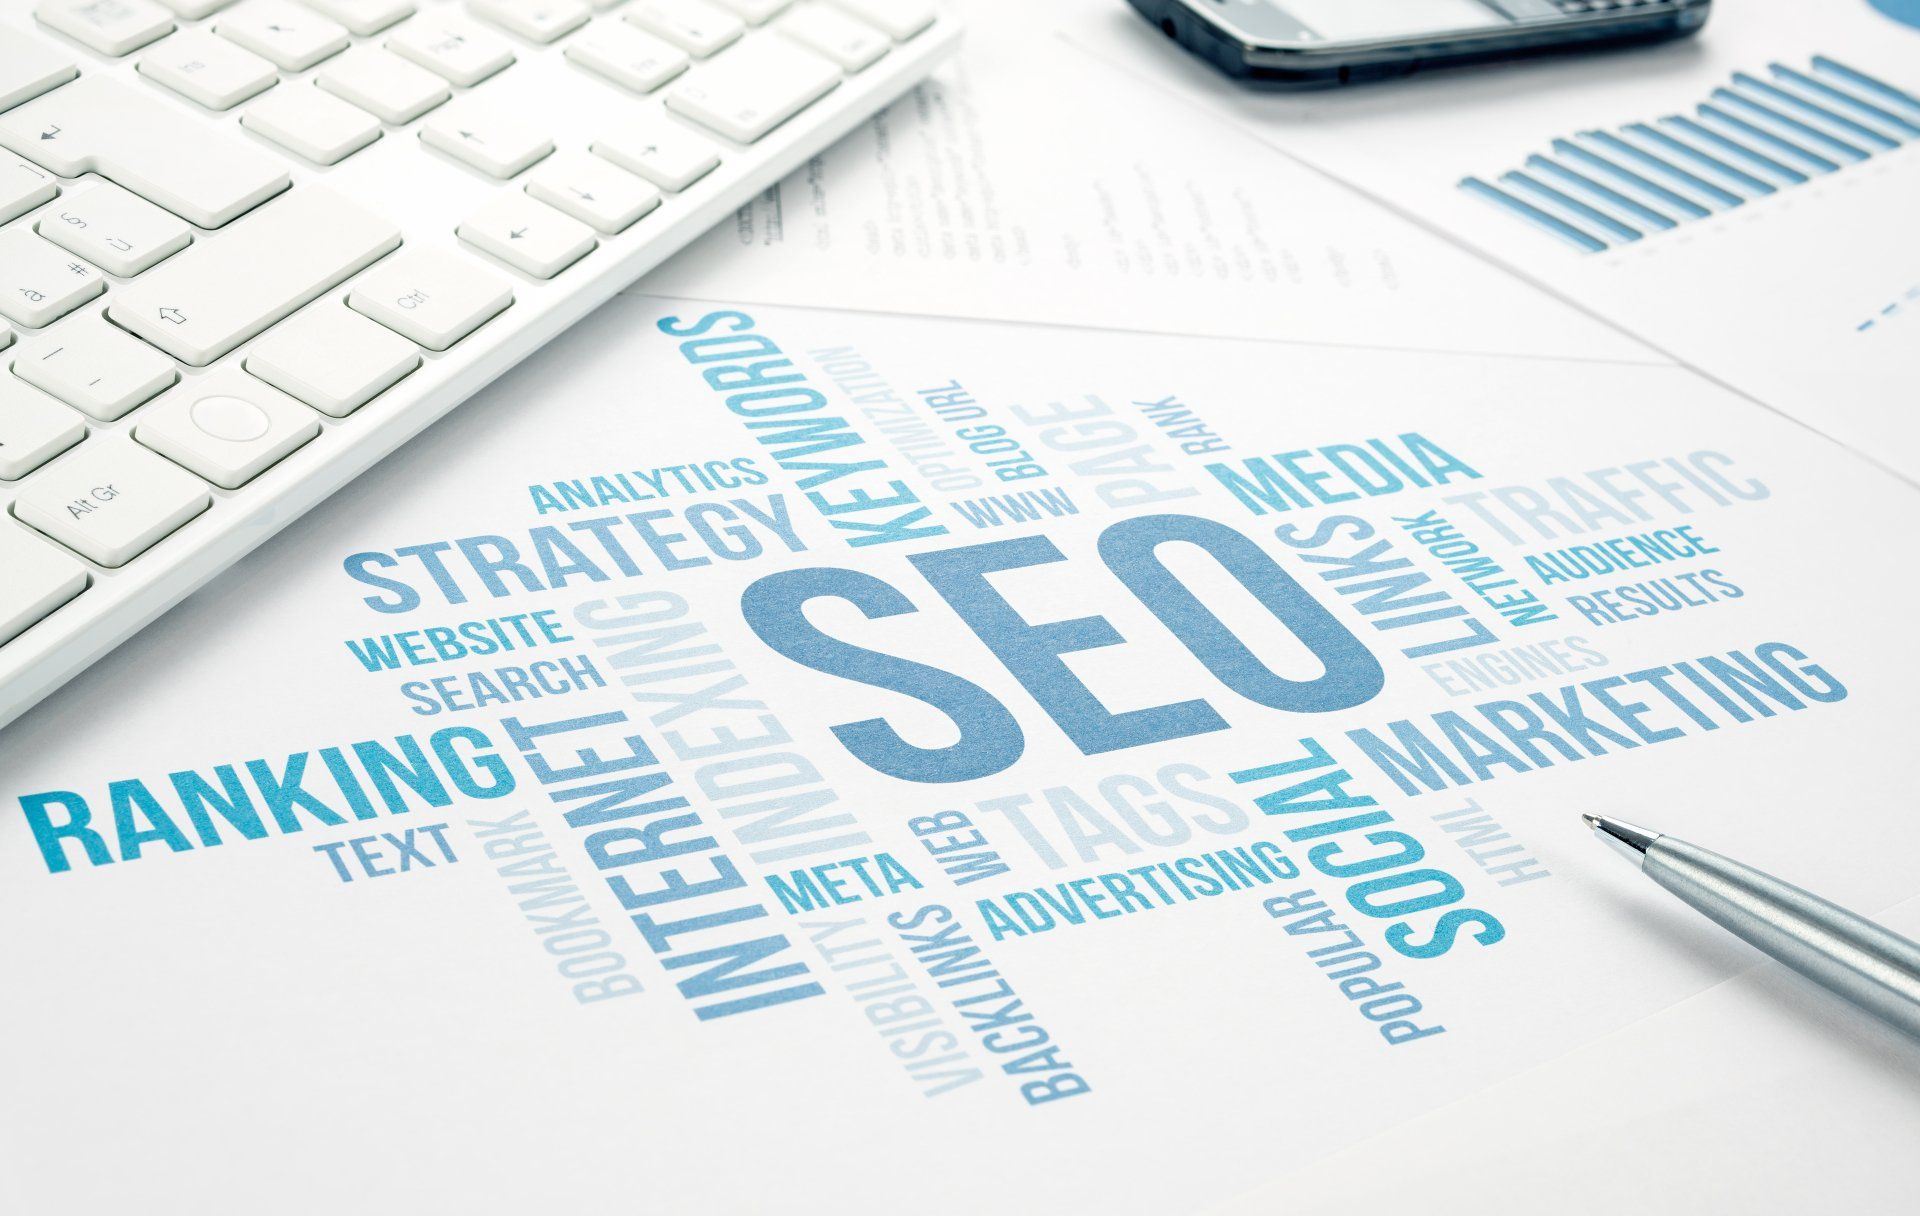 Search Engine Optimization Meaning